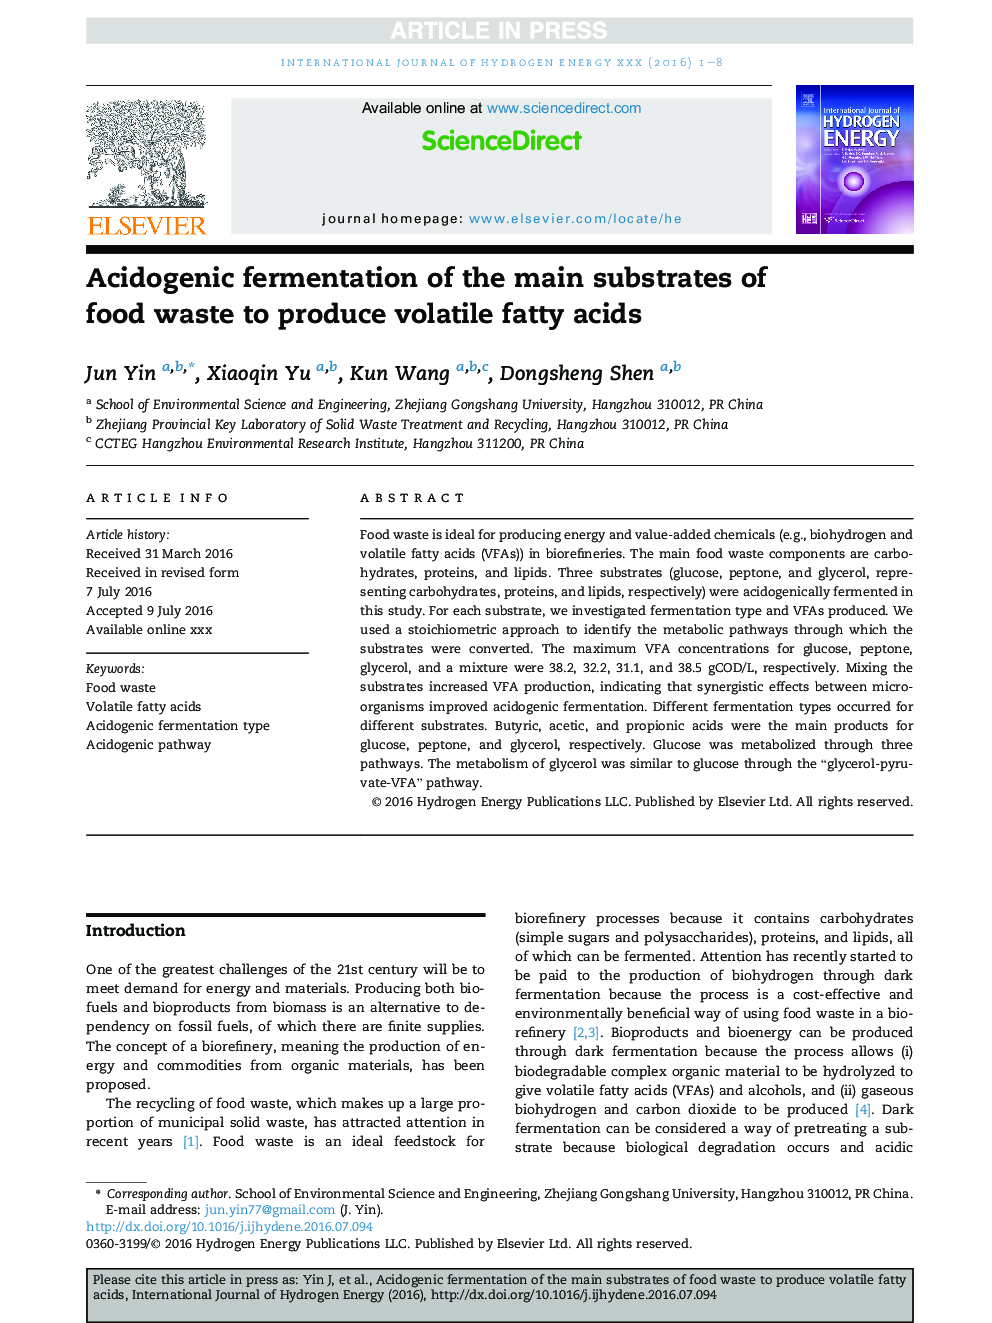 Acidogenic fermentation of the main substrates of food waste to produce volatile fatty acids